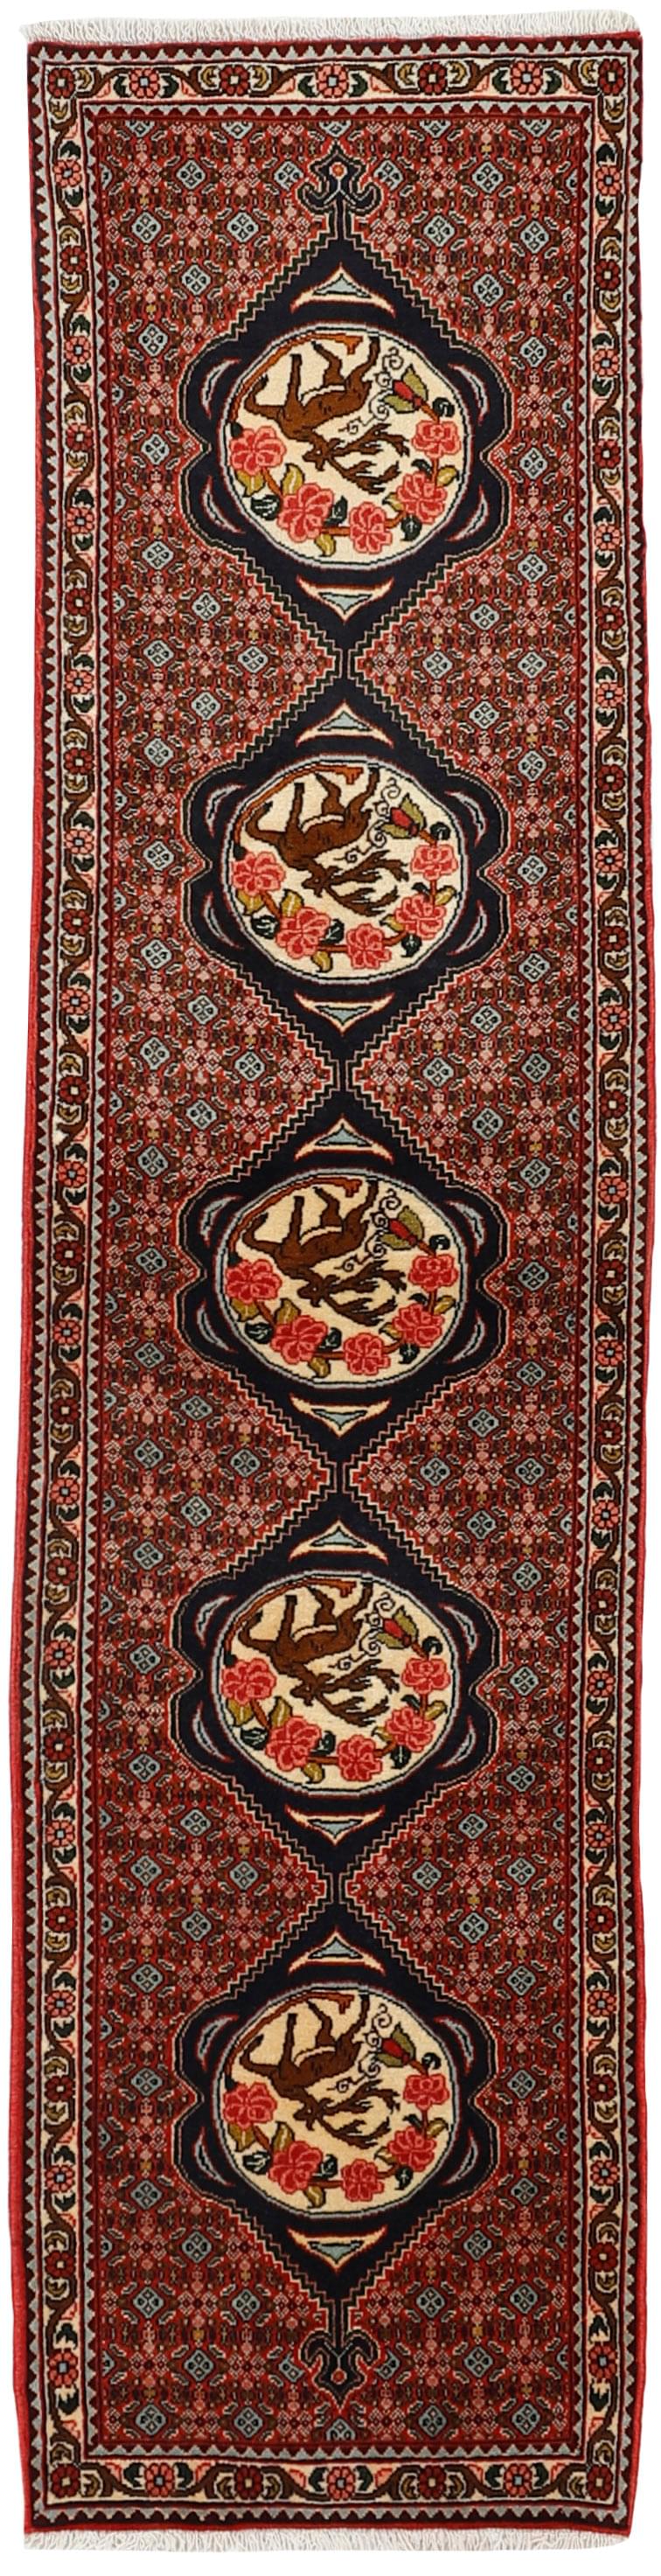 authentic persian runner with a traditional geometric design in red